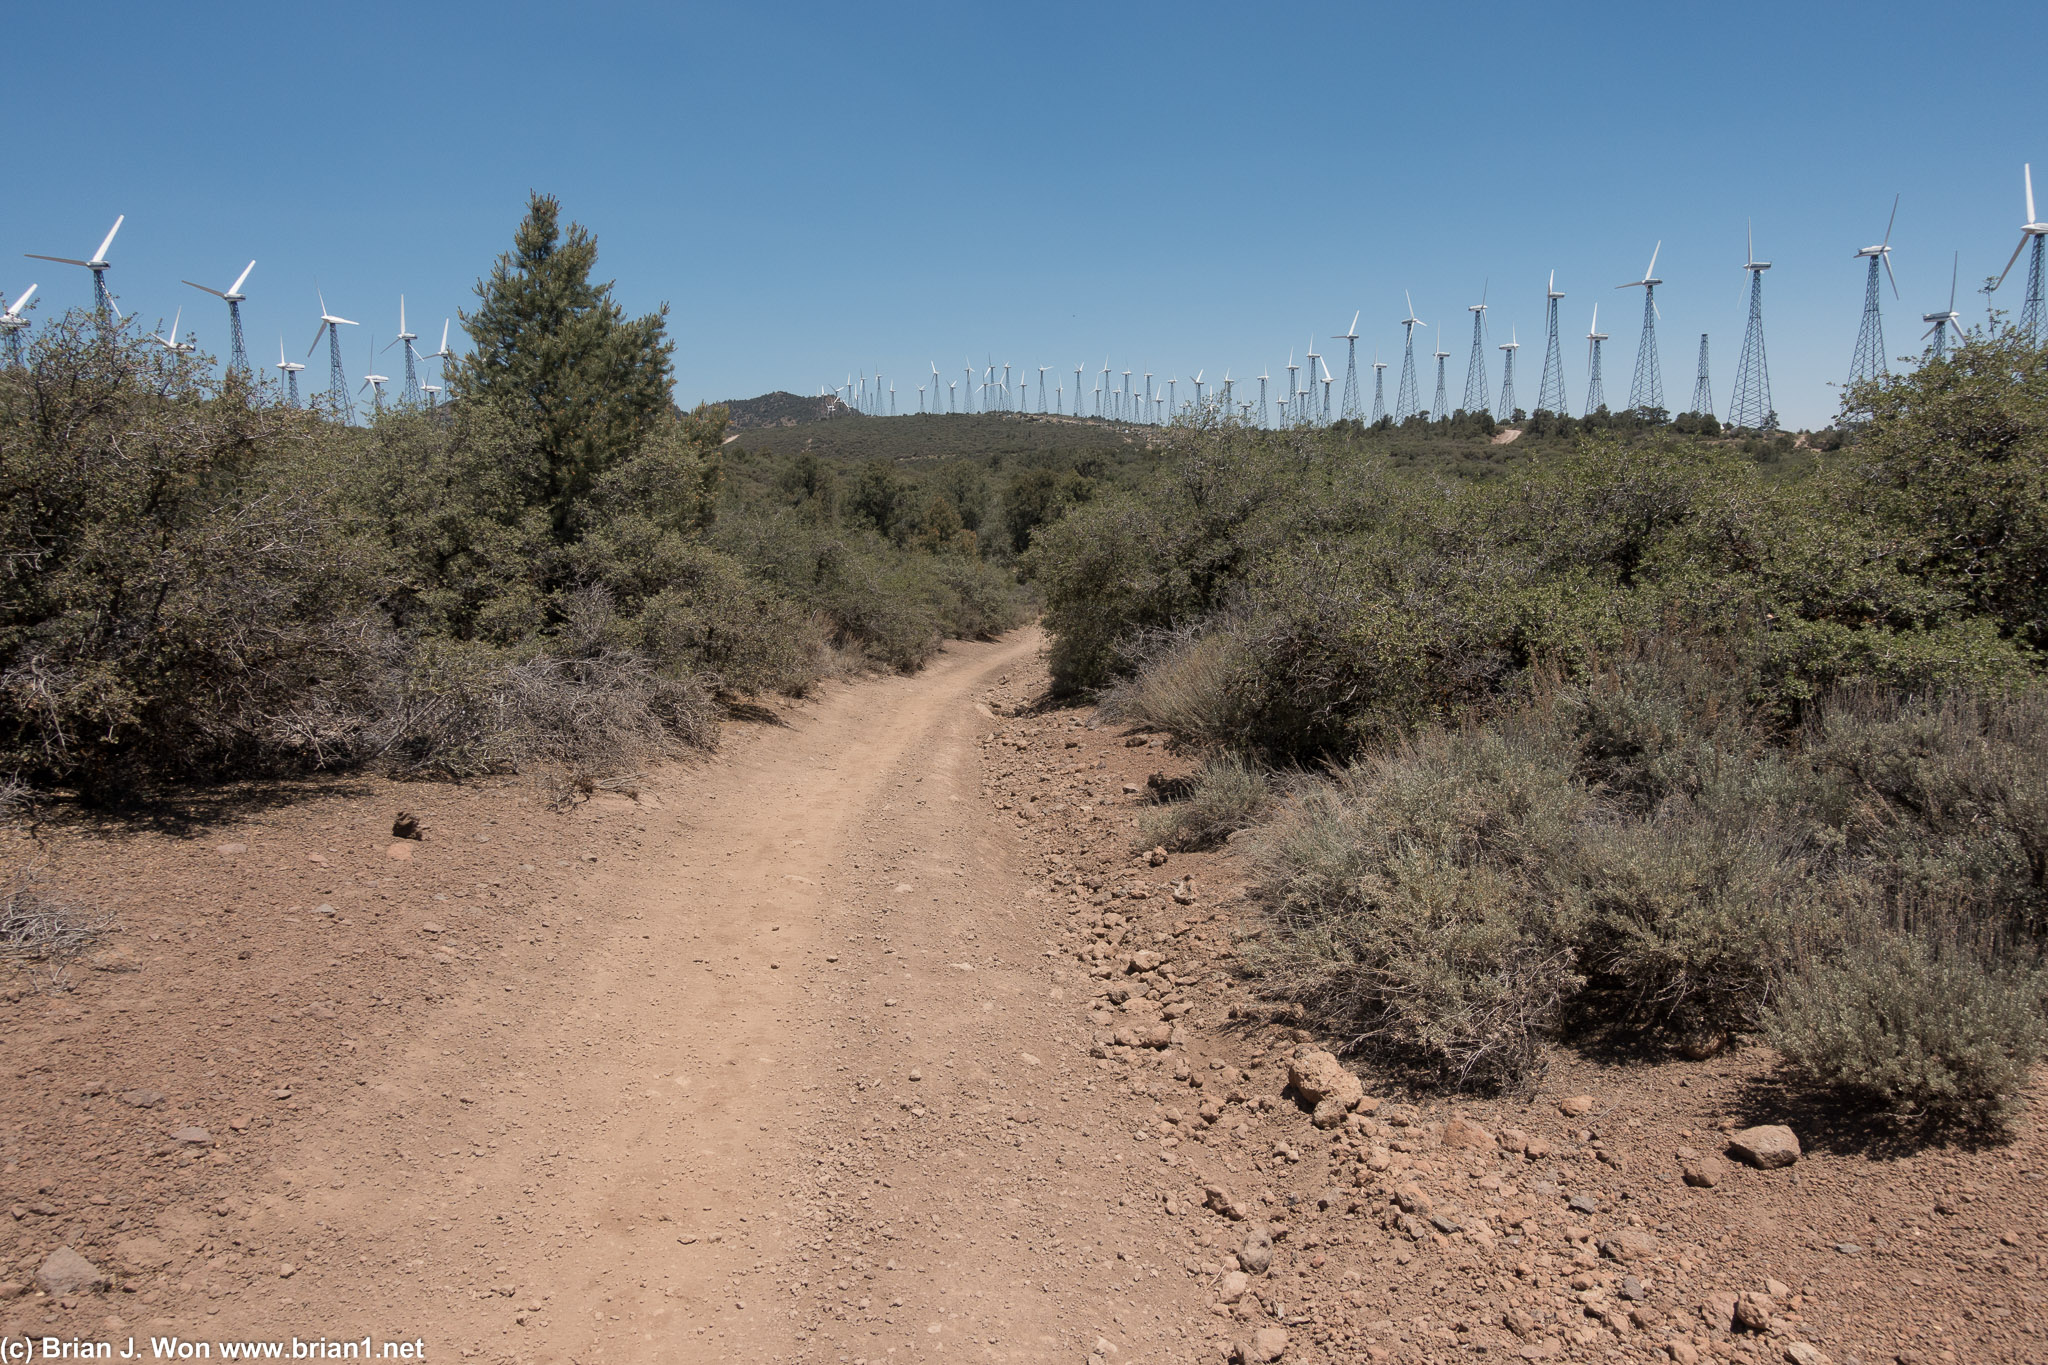 More windmills, just shy of mile 13 (PCT Mile 579 or so).